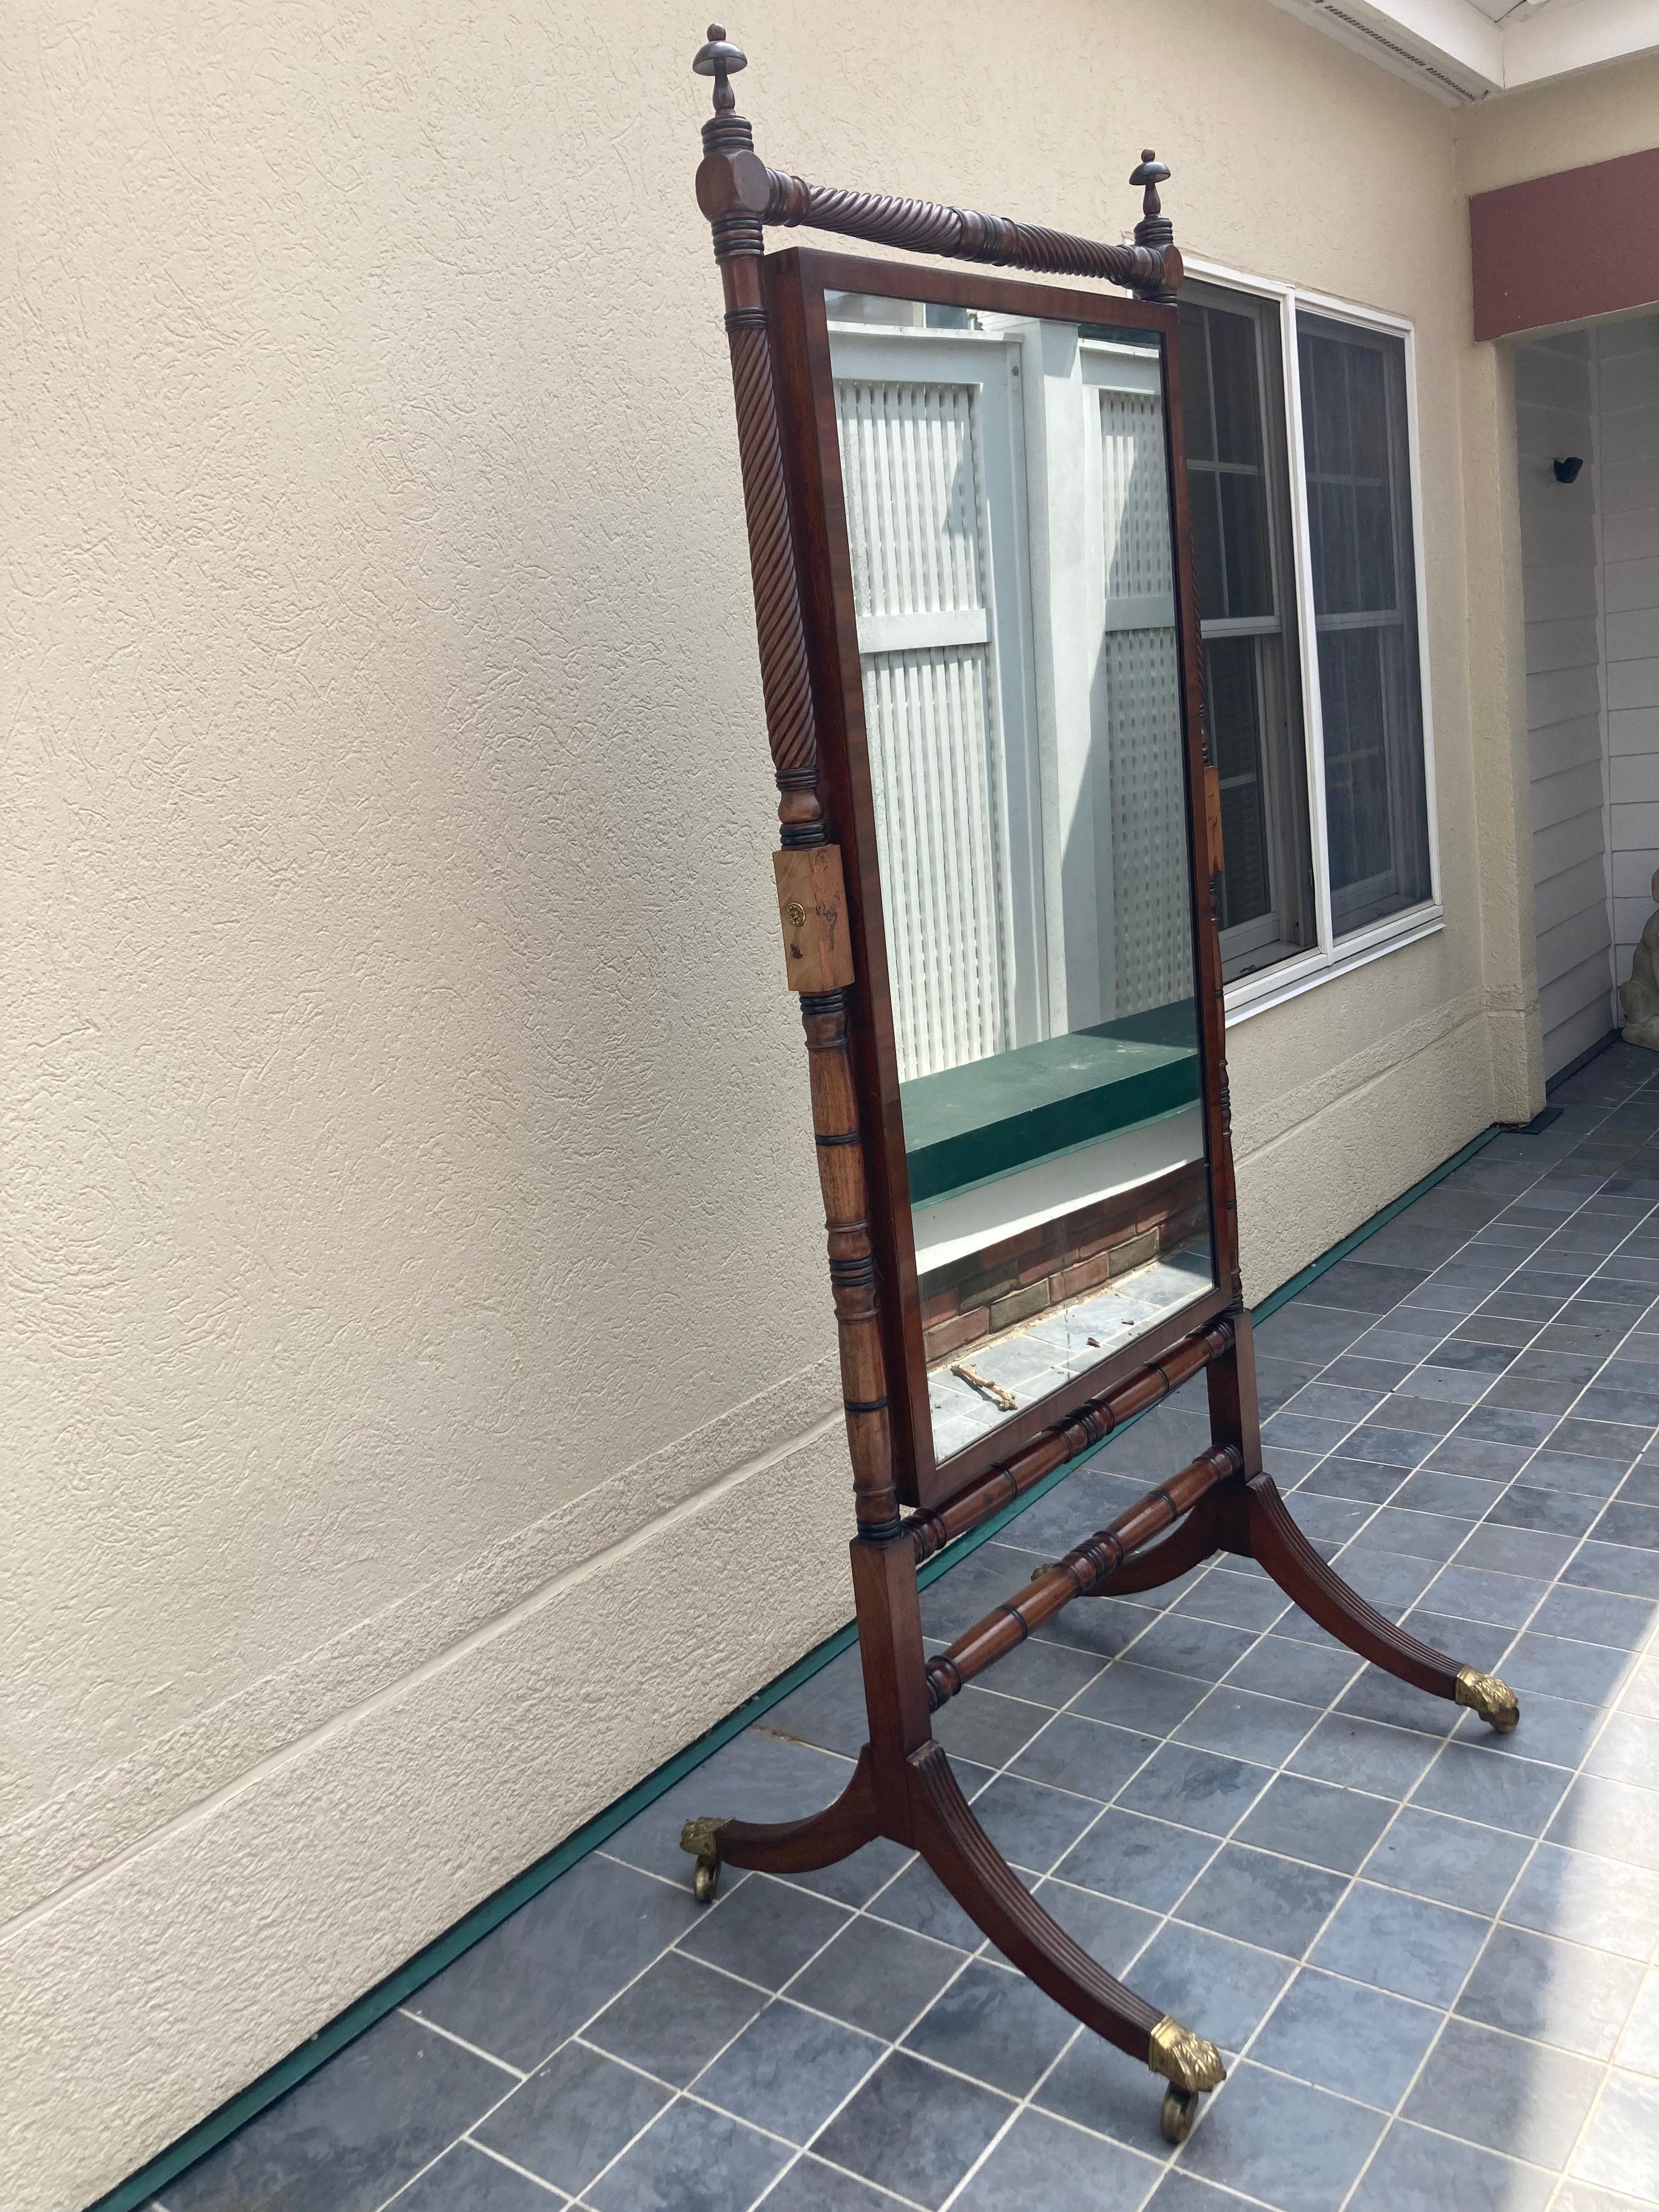 Classic Regency style Cheval floor mirror having a turned mahogany frame with block and spindle supports with handsome finials holding a pivoting mirror in a molded frame. Frame ending in brass claw feet on casters. 

Mirror only: 
25.75” wt